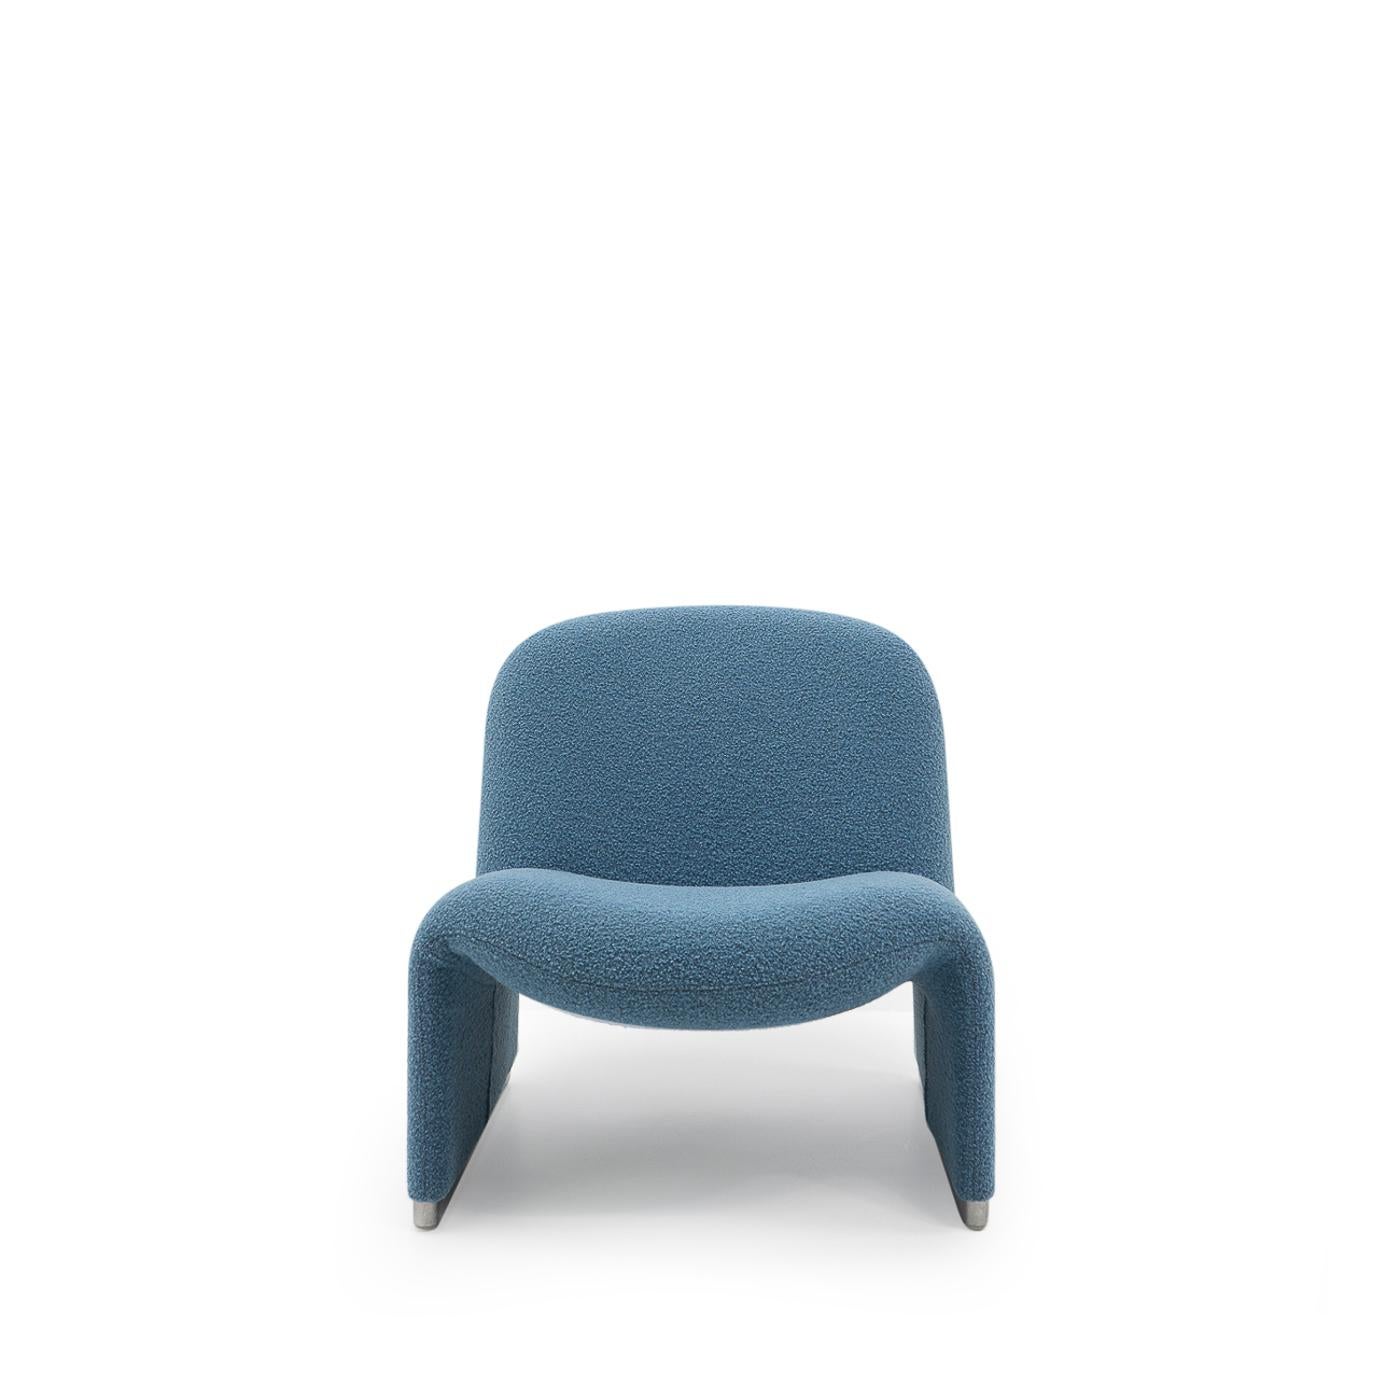 Beautifully restored “Alky” lounge chair produced by Artifort and designed by Giancarlo Piretti (also known for the Plia and Plona chairs).

The Alky chair was conceptualized in 1968 and has seen lately renewed interest due to its easy integration